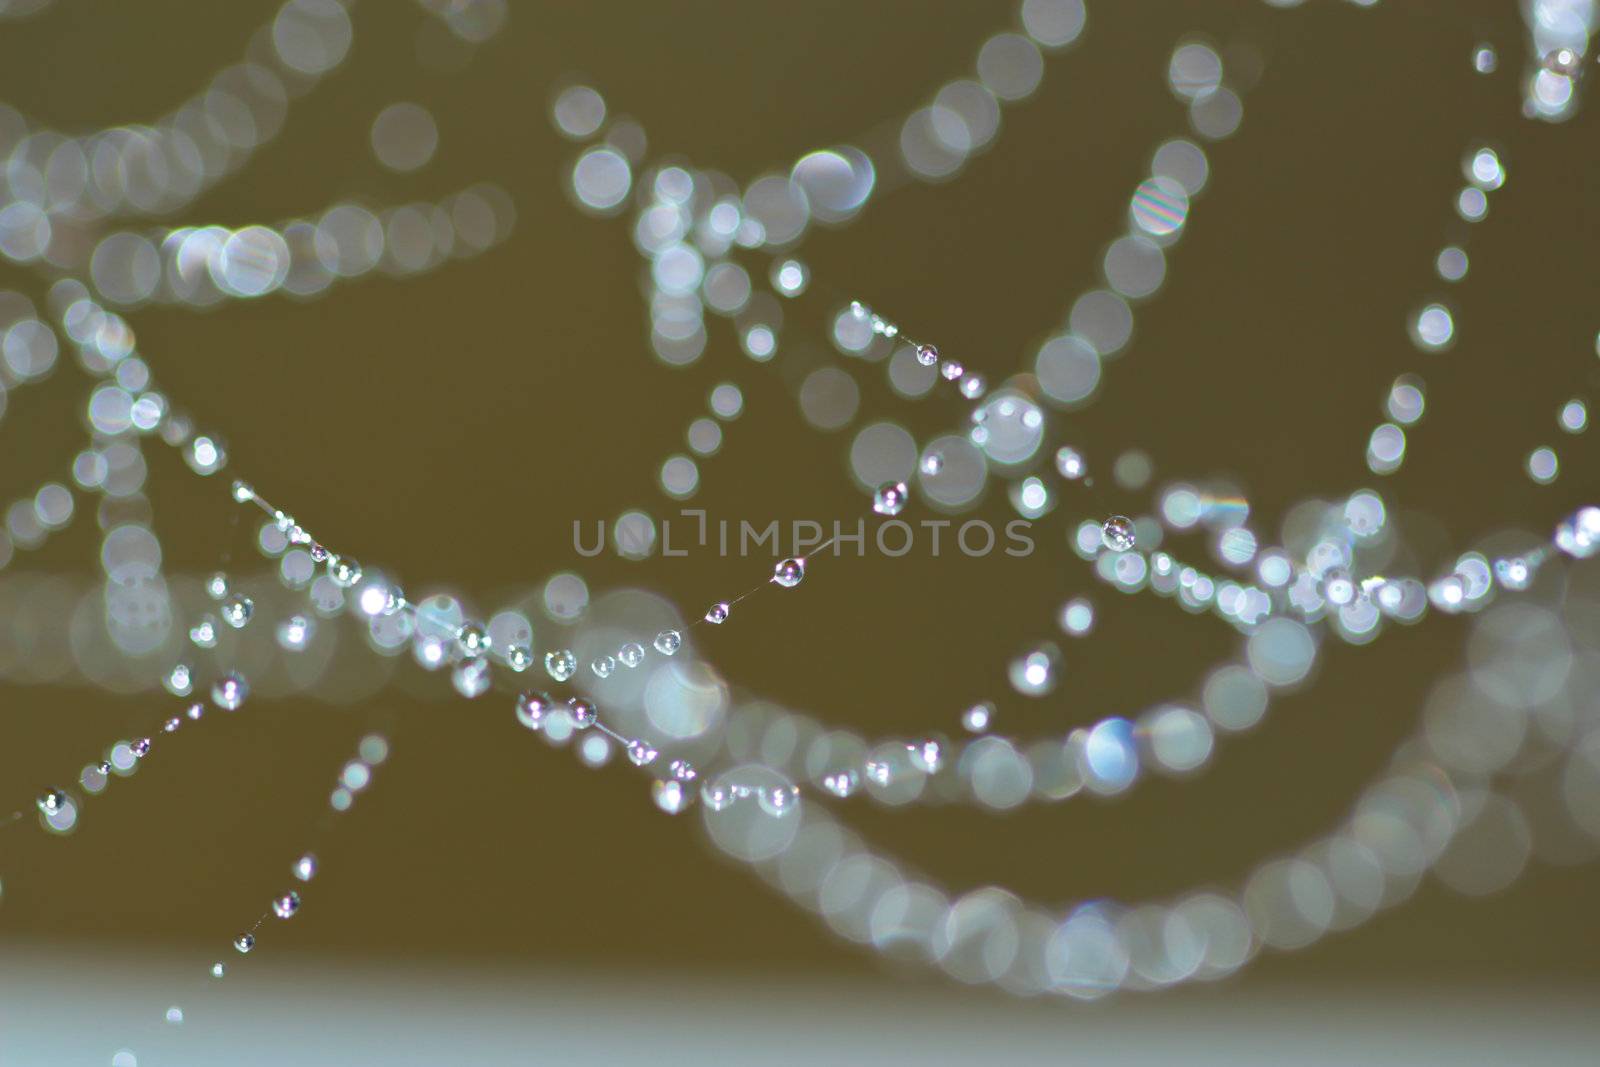 Spider Web Covered with Sparkling Dew Drops